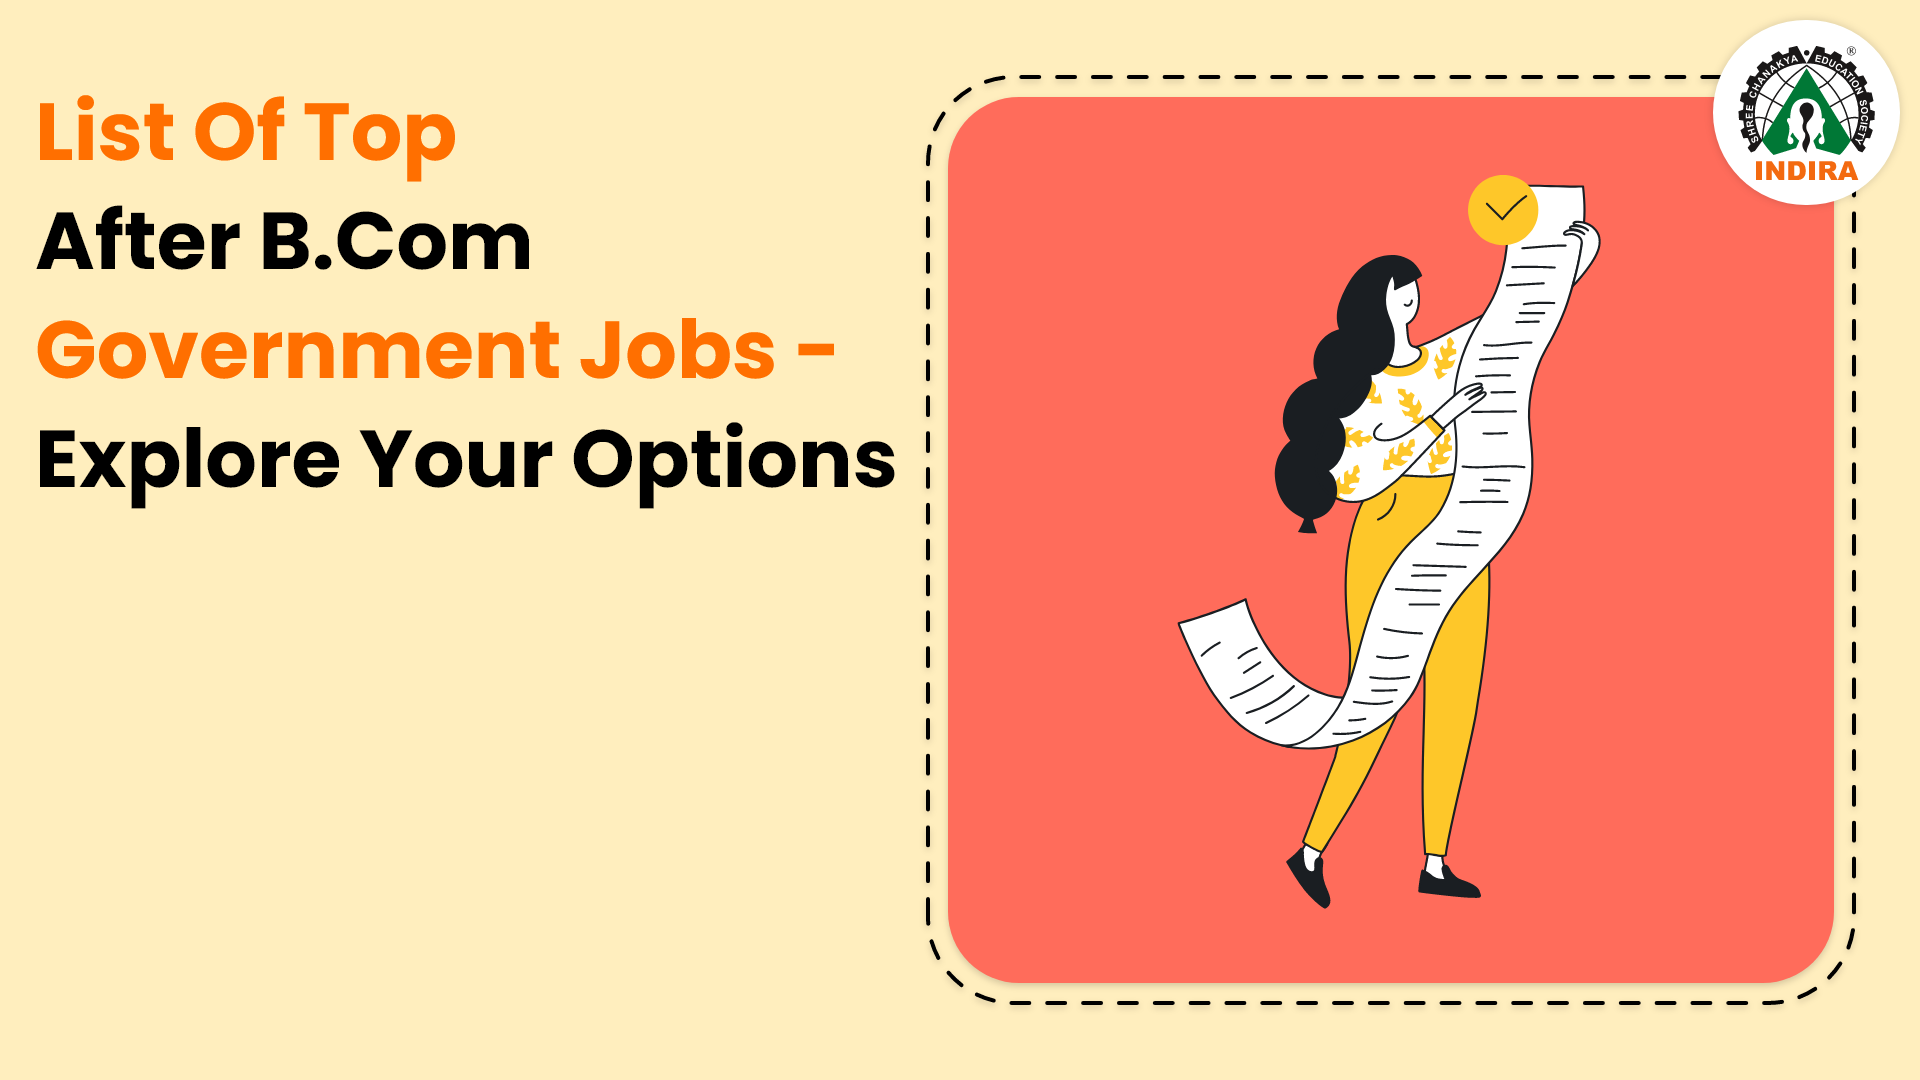 List of Top After B.Com Government Jobs - Explore Your Options